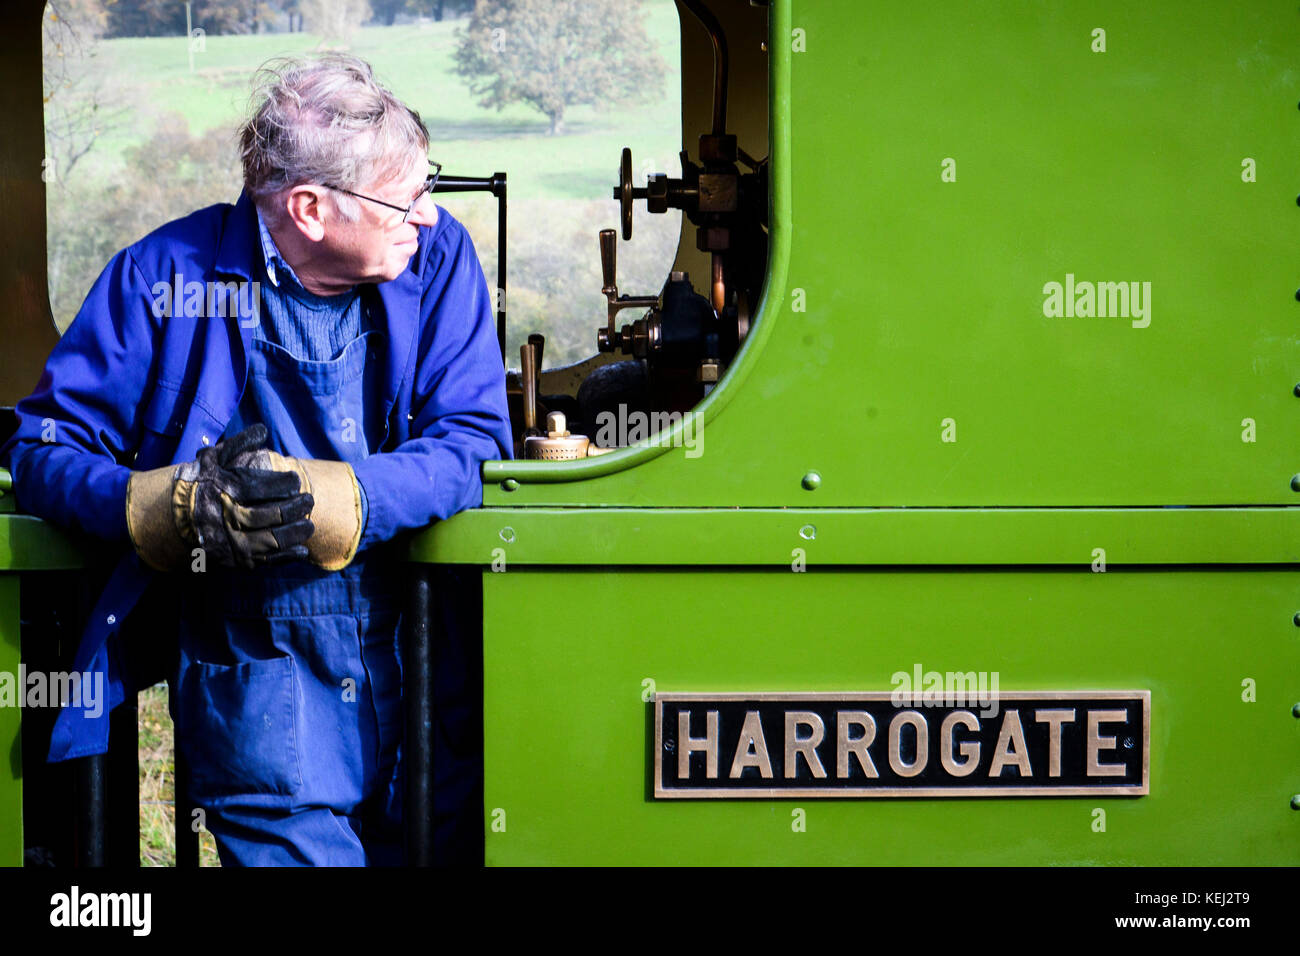 Stock Photo -  South Tynedale Railway is a preserved, 2 ft (610 mm) narrow gauge heritage railway in Northern England and is England's highest narrow gauge railway.  © Hugh Peterswald/Alamy Stock Photo